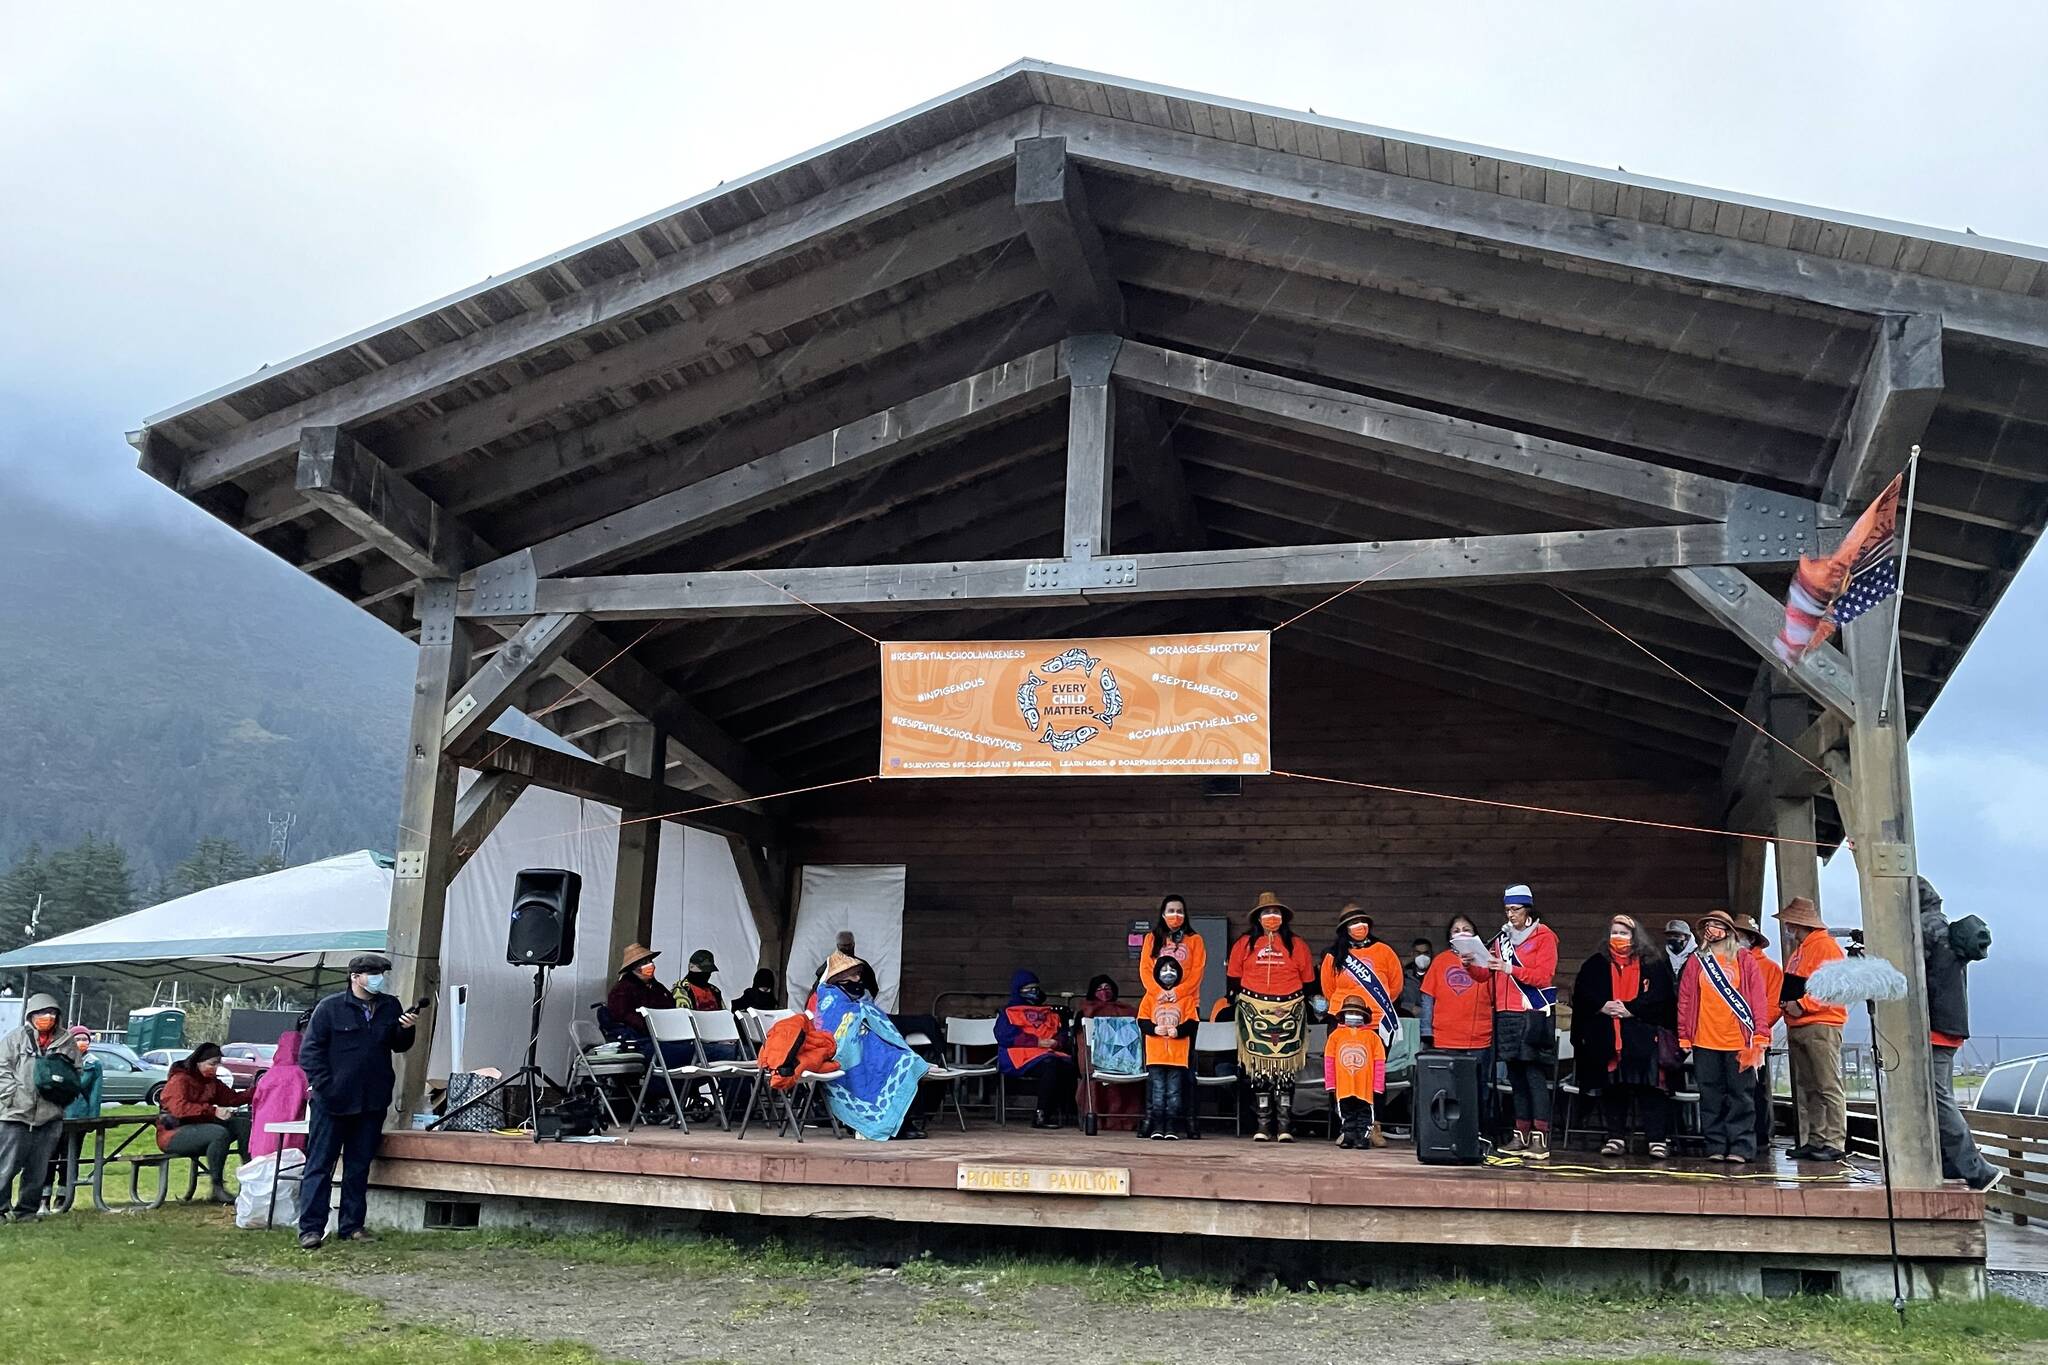 More than 100 gathered at an Orange Shirt Day event near Sandy Beach on Sept. 30, 2021, in remembrance of the Indigenous children killed in North America in the boarding school system. Indigenous leaders are calling for a national commission on truth and healing to address intergenerational trauma stemming from boarding schools. (Michael S. Lockett / Juneau Empire File)